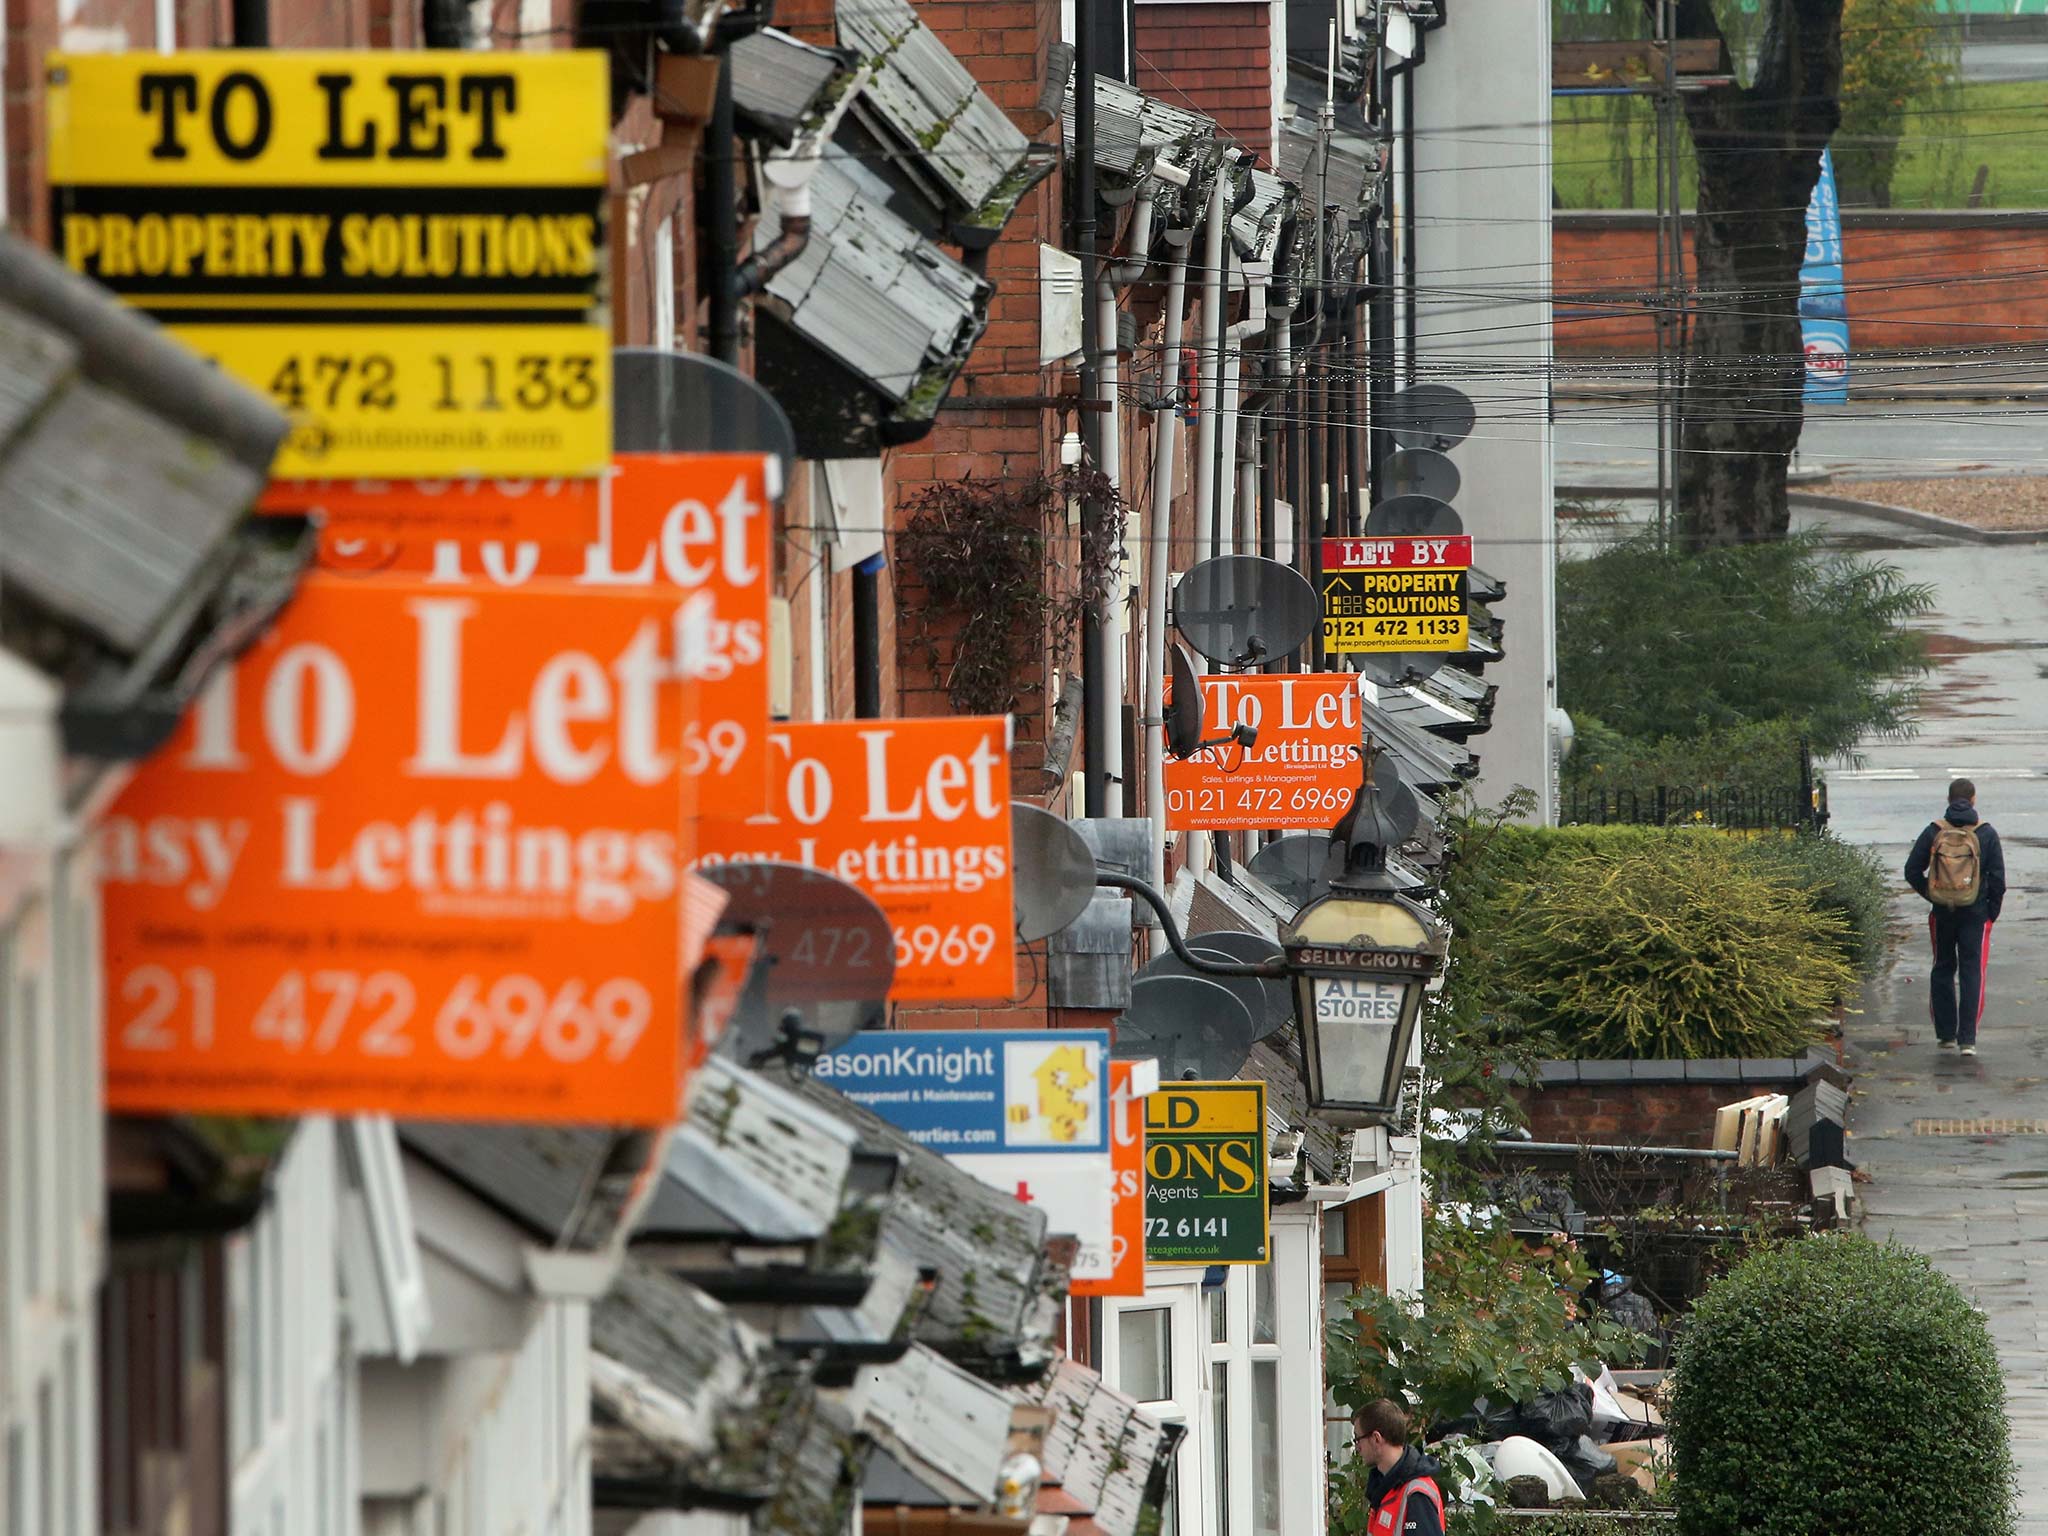 The housing market continues to struggle amid the economic uncertainty caused by Brexit